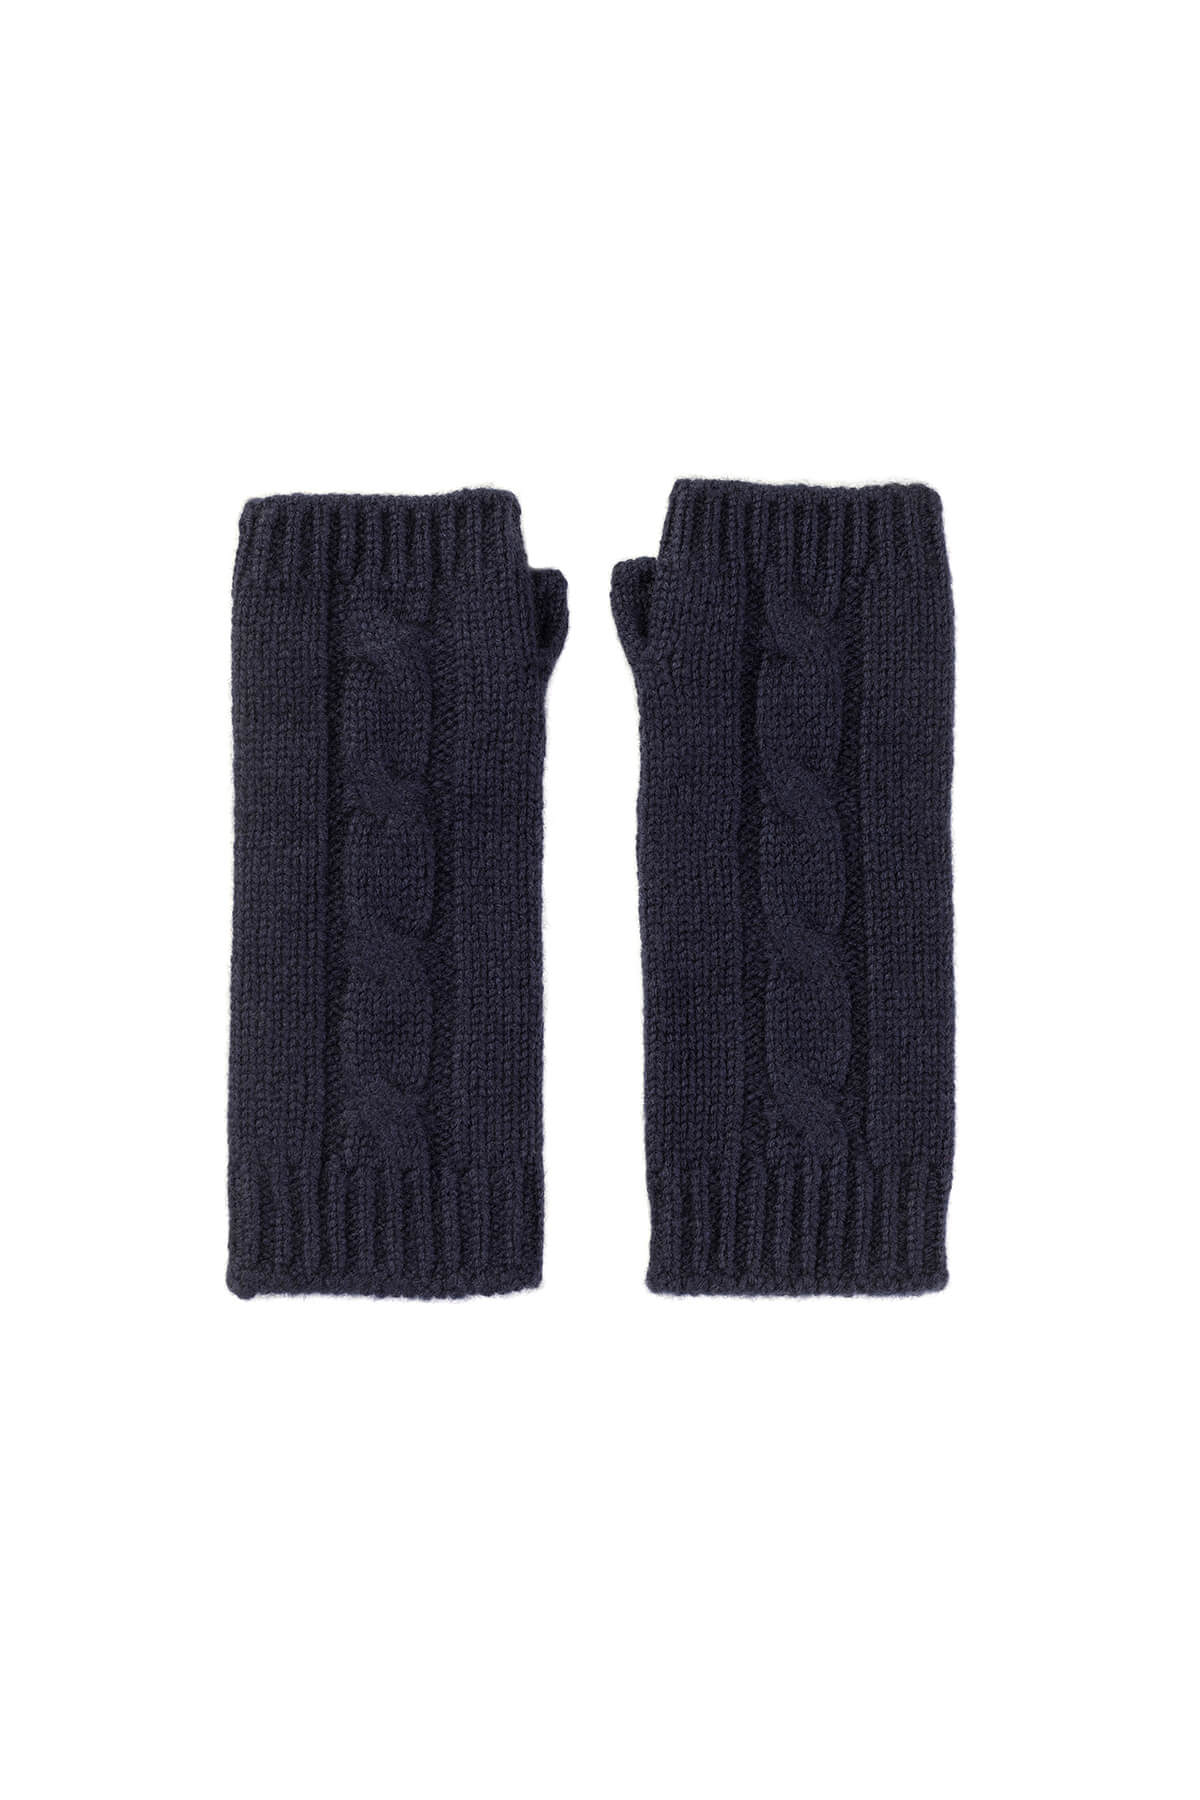 Johnstons of Elgin’s Navy Cable Cashmere Wrist Warmers on a white background HAY03197SD0707